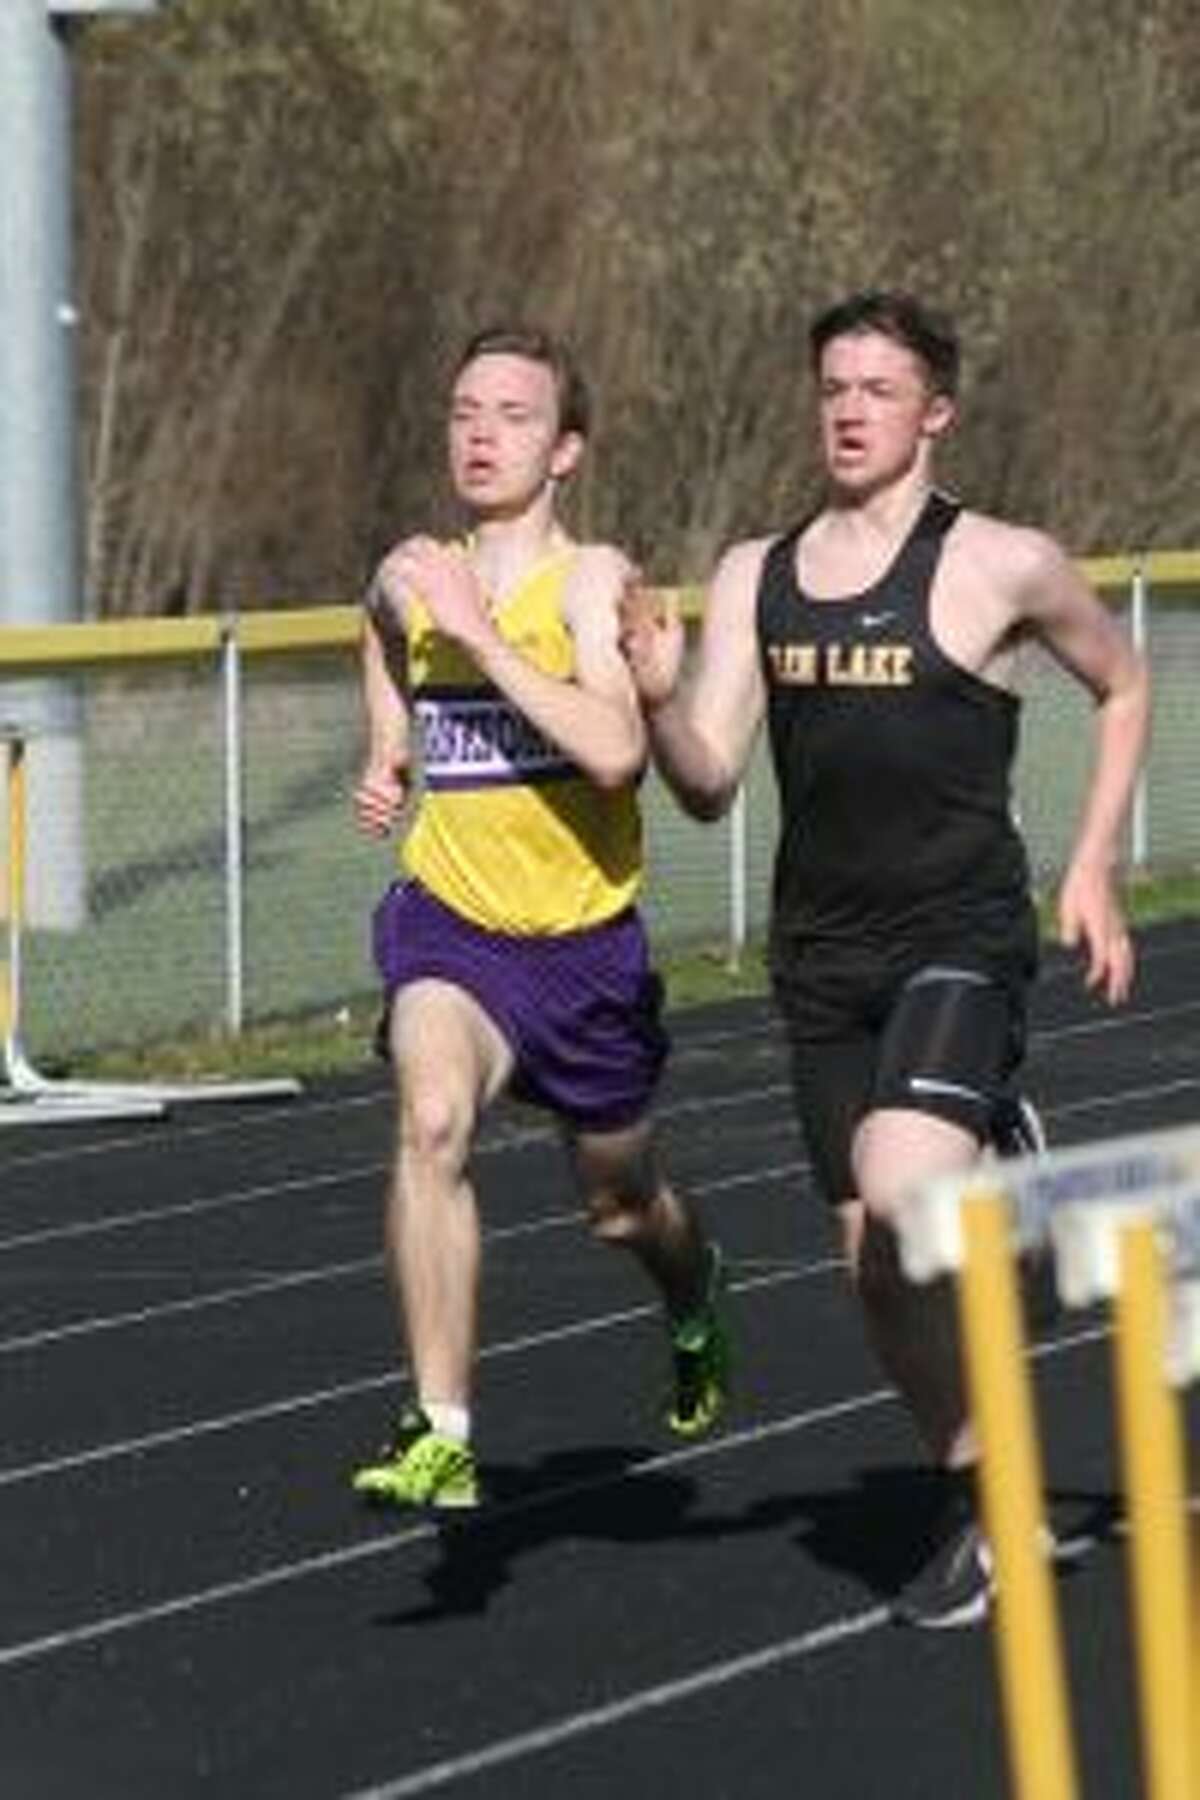 Owen Roth pushes past Glen Lake's Tommy Reay near the finish line to win the 1,600-meter run. (Photo/Dylan Savela)